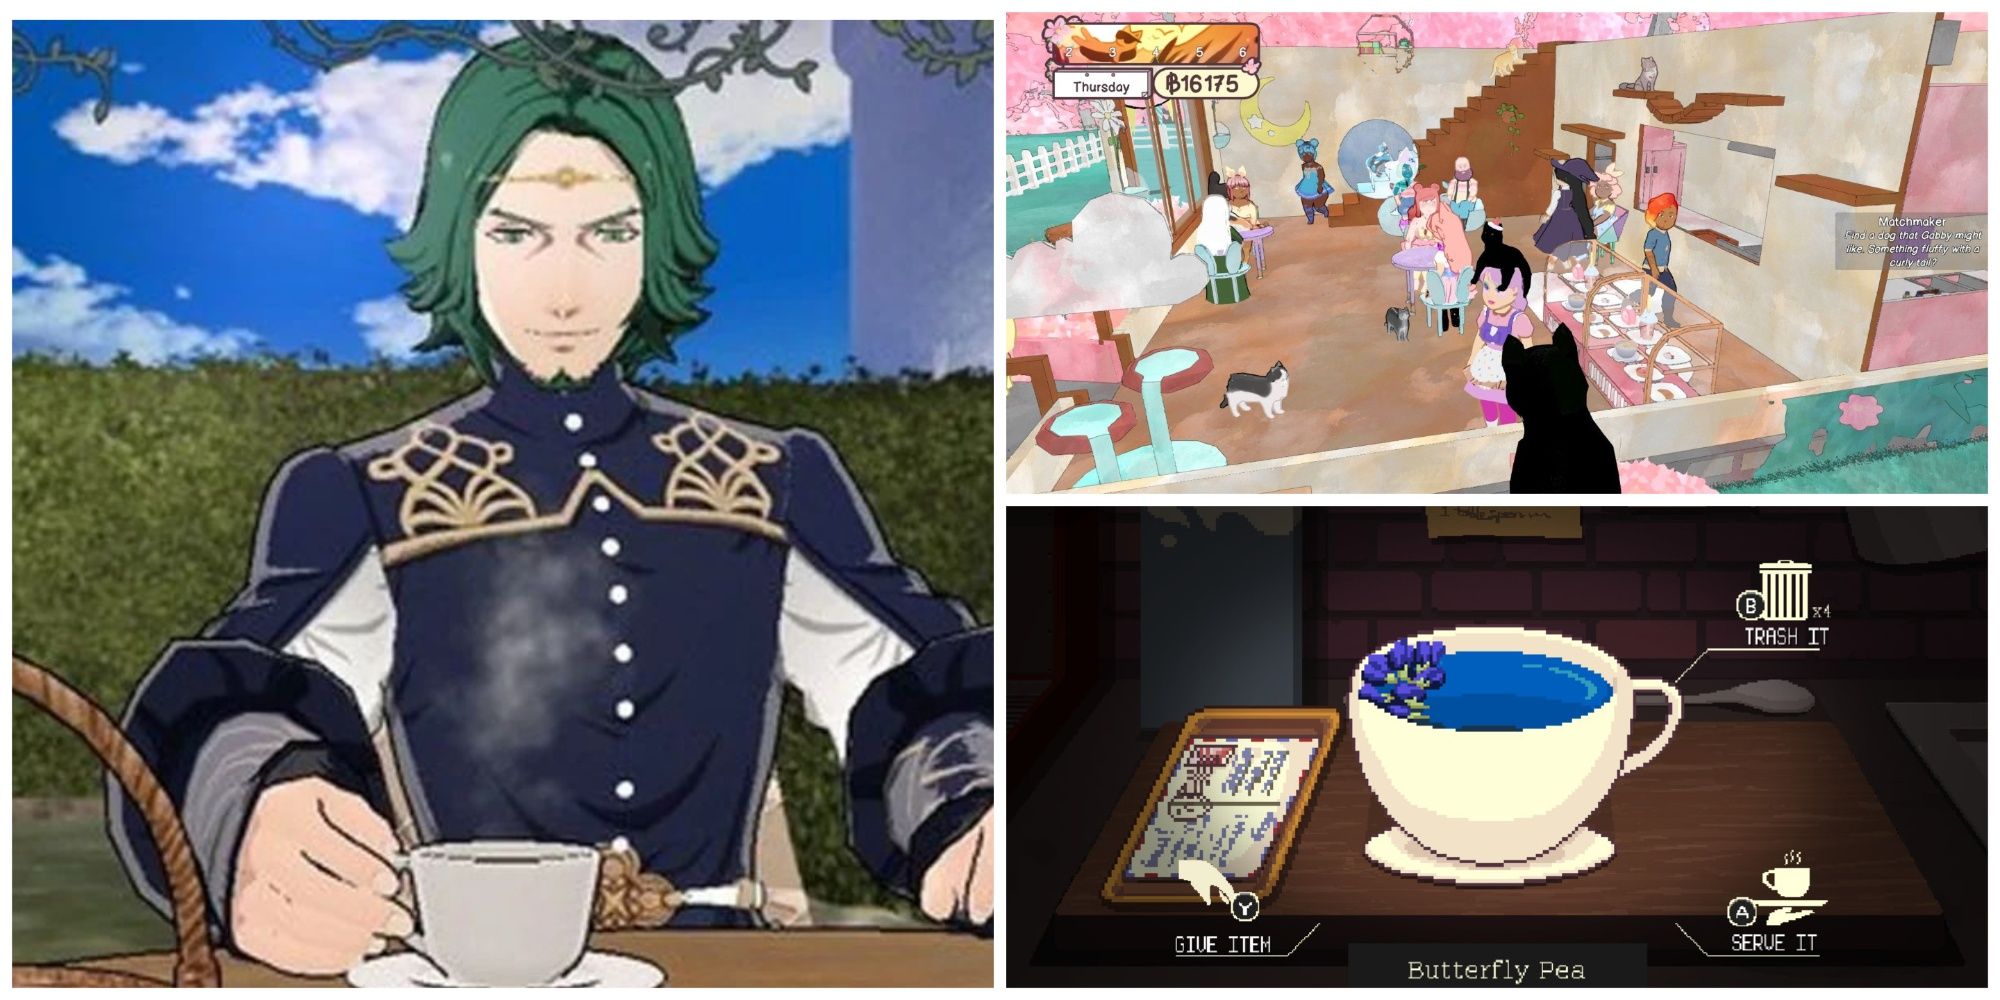 Left: Seteth from Fire Emblem: Three Houses. Top-right: A cat café from Calico. Bottom-Right: A cup of Butterfly Pea from Coffee Talk Episode 2: Hibiscus and Butterfly.